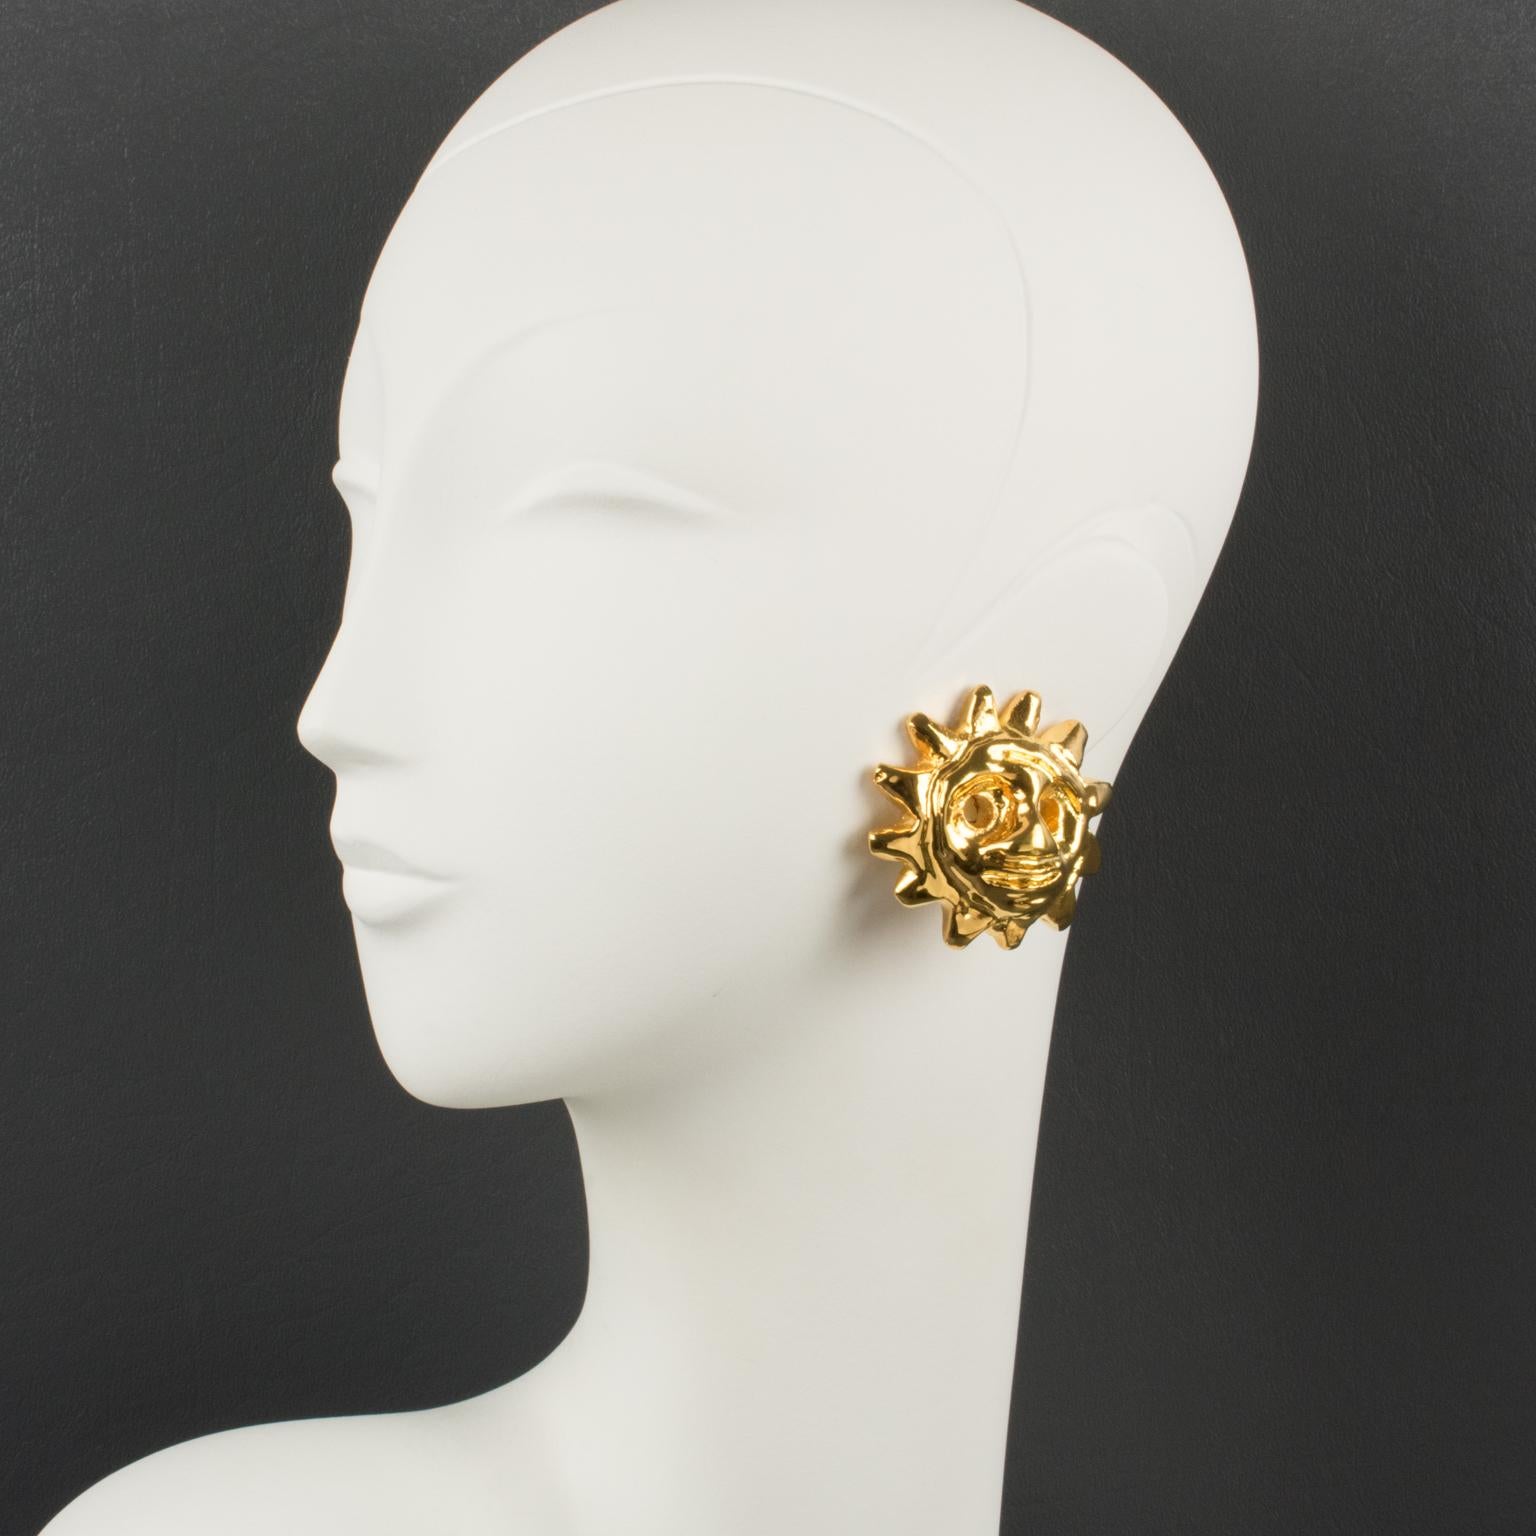 Stunning Christian Lacroix Paris signed clip-on earrings. Featuring dimensional gilt-metal coated resin sun mask with a high shine finish aspect. Marked underside: 